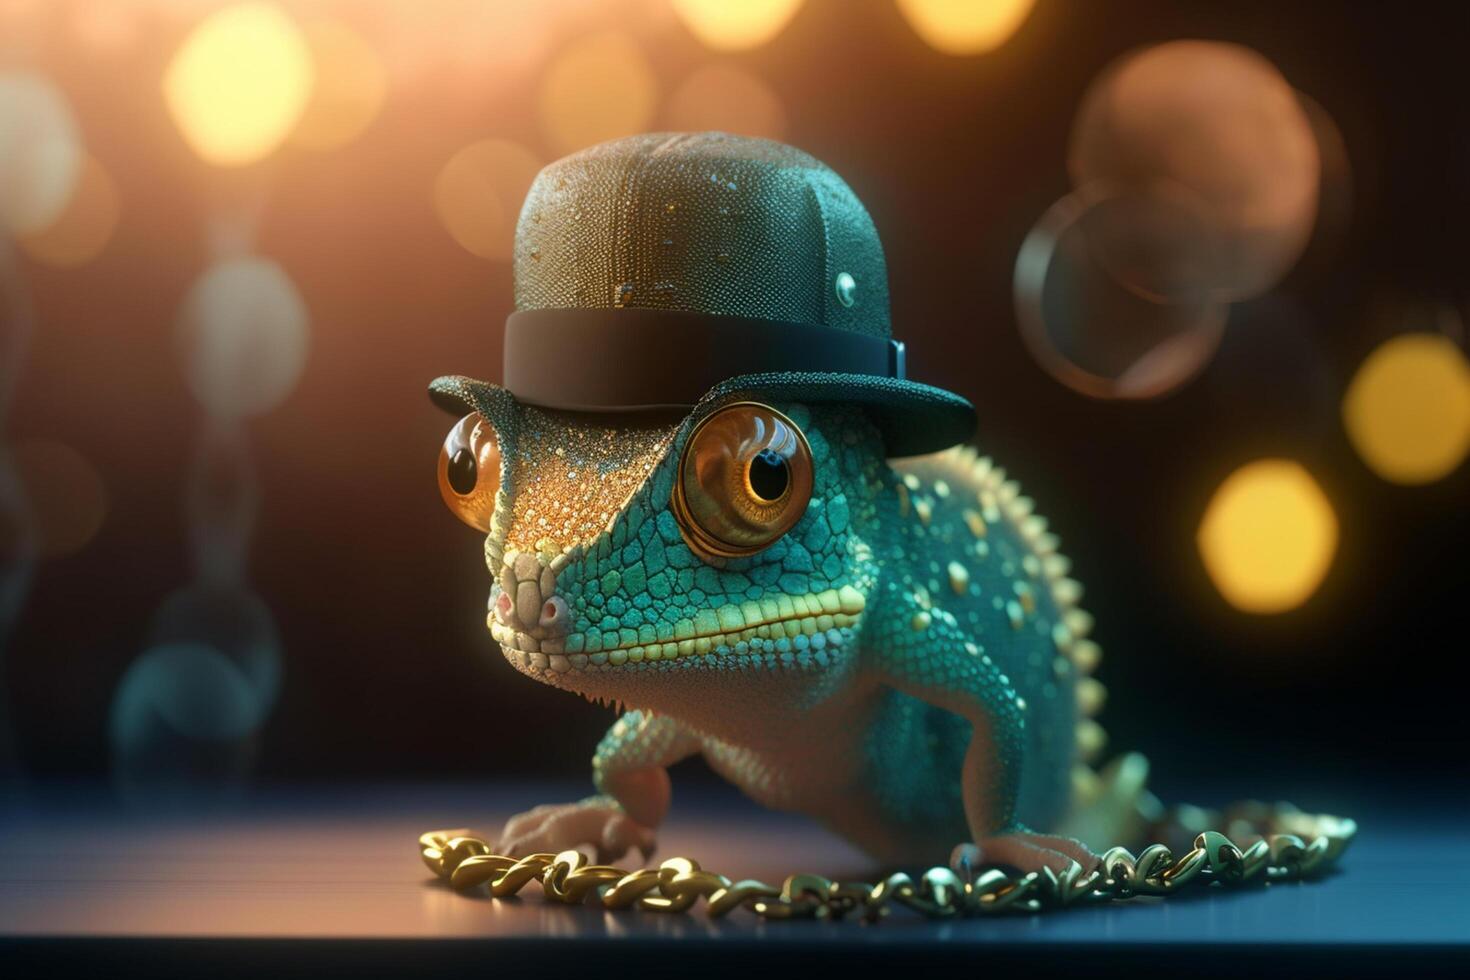 The Gangsta Chameleon With a Cap and Gold Chains photo